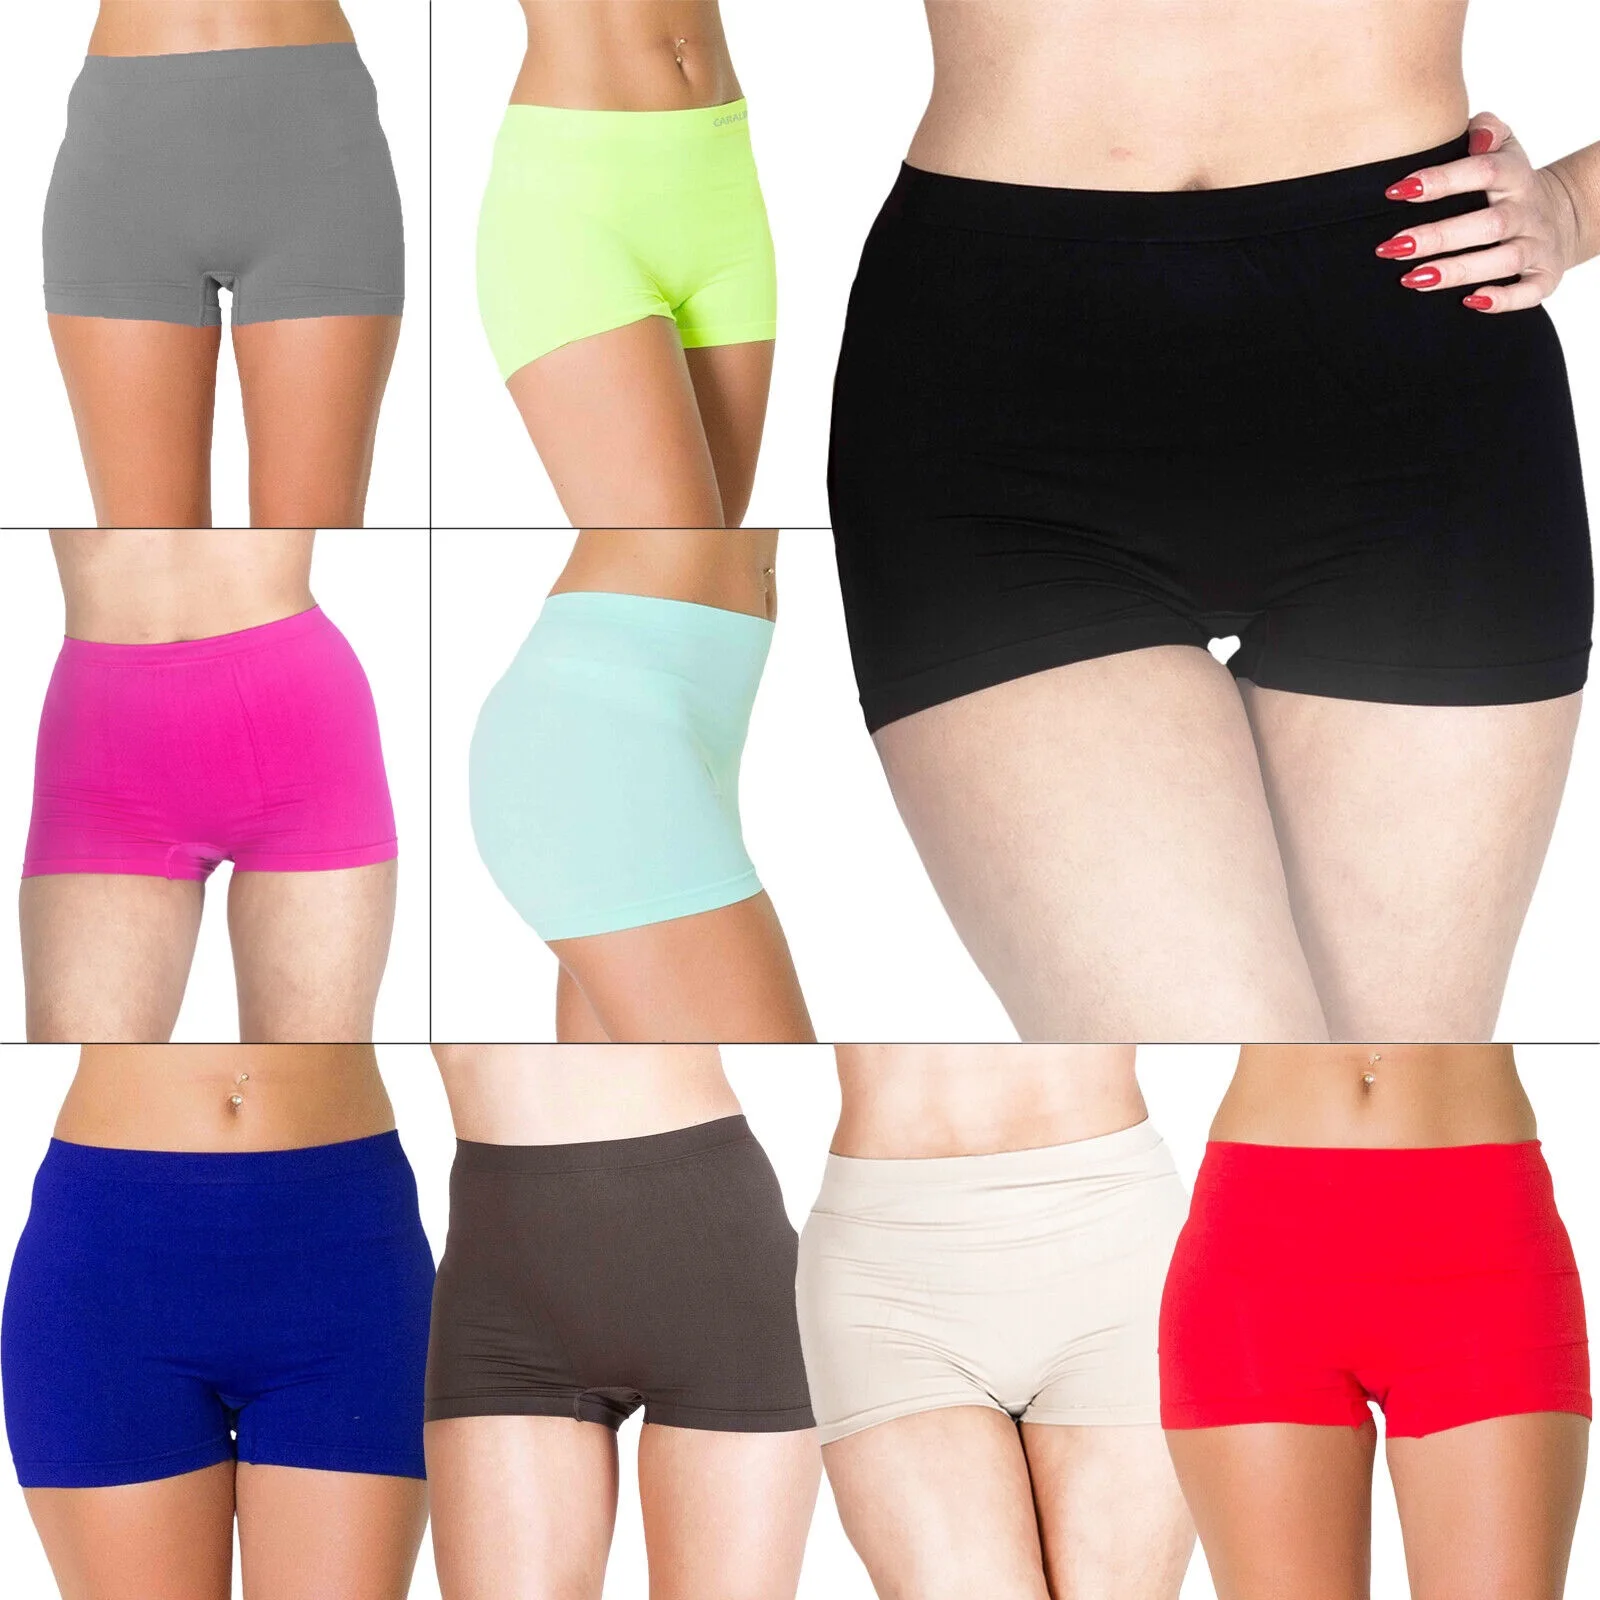 Ladies Underwear Shorts - 100% Cooton Factory Outlet Branded Tied Shorts  Panties For Women